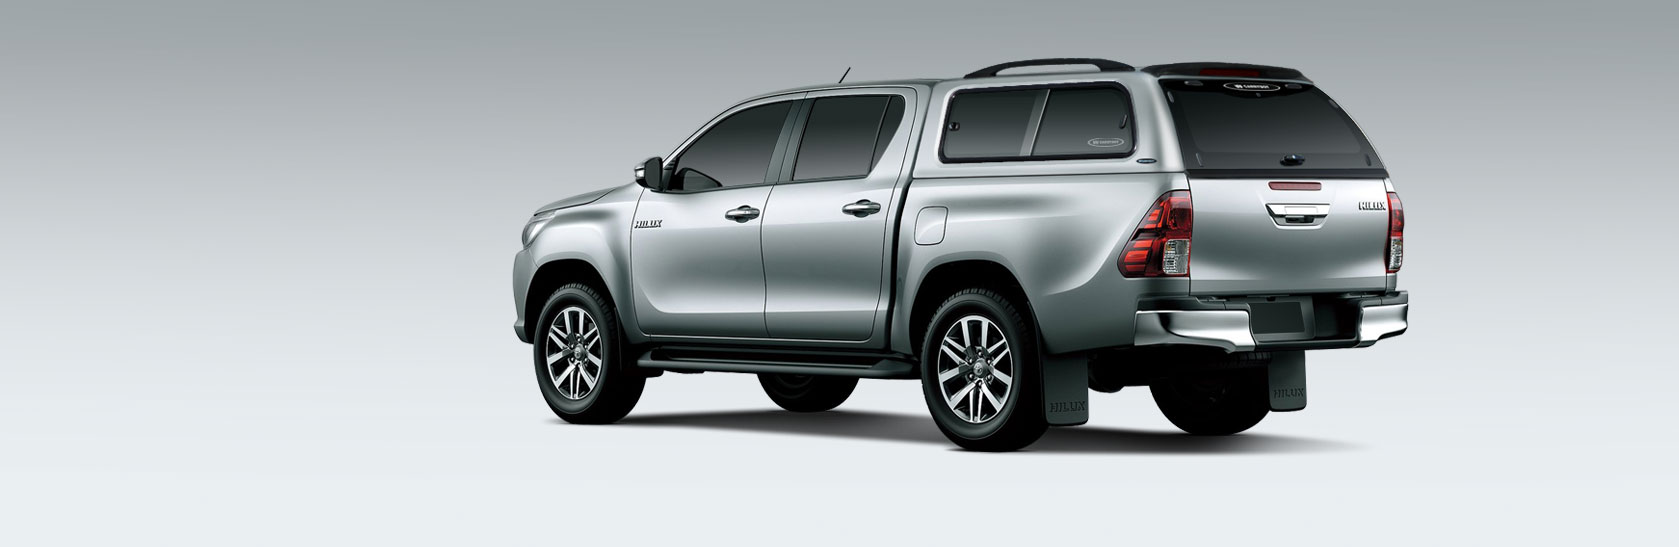 carryboy-toyota-hilux-revo-2015-canopy-canopies-s560-soseries-All-New-HiLux-2016_03_02_02.jpg